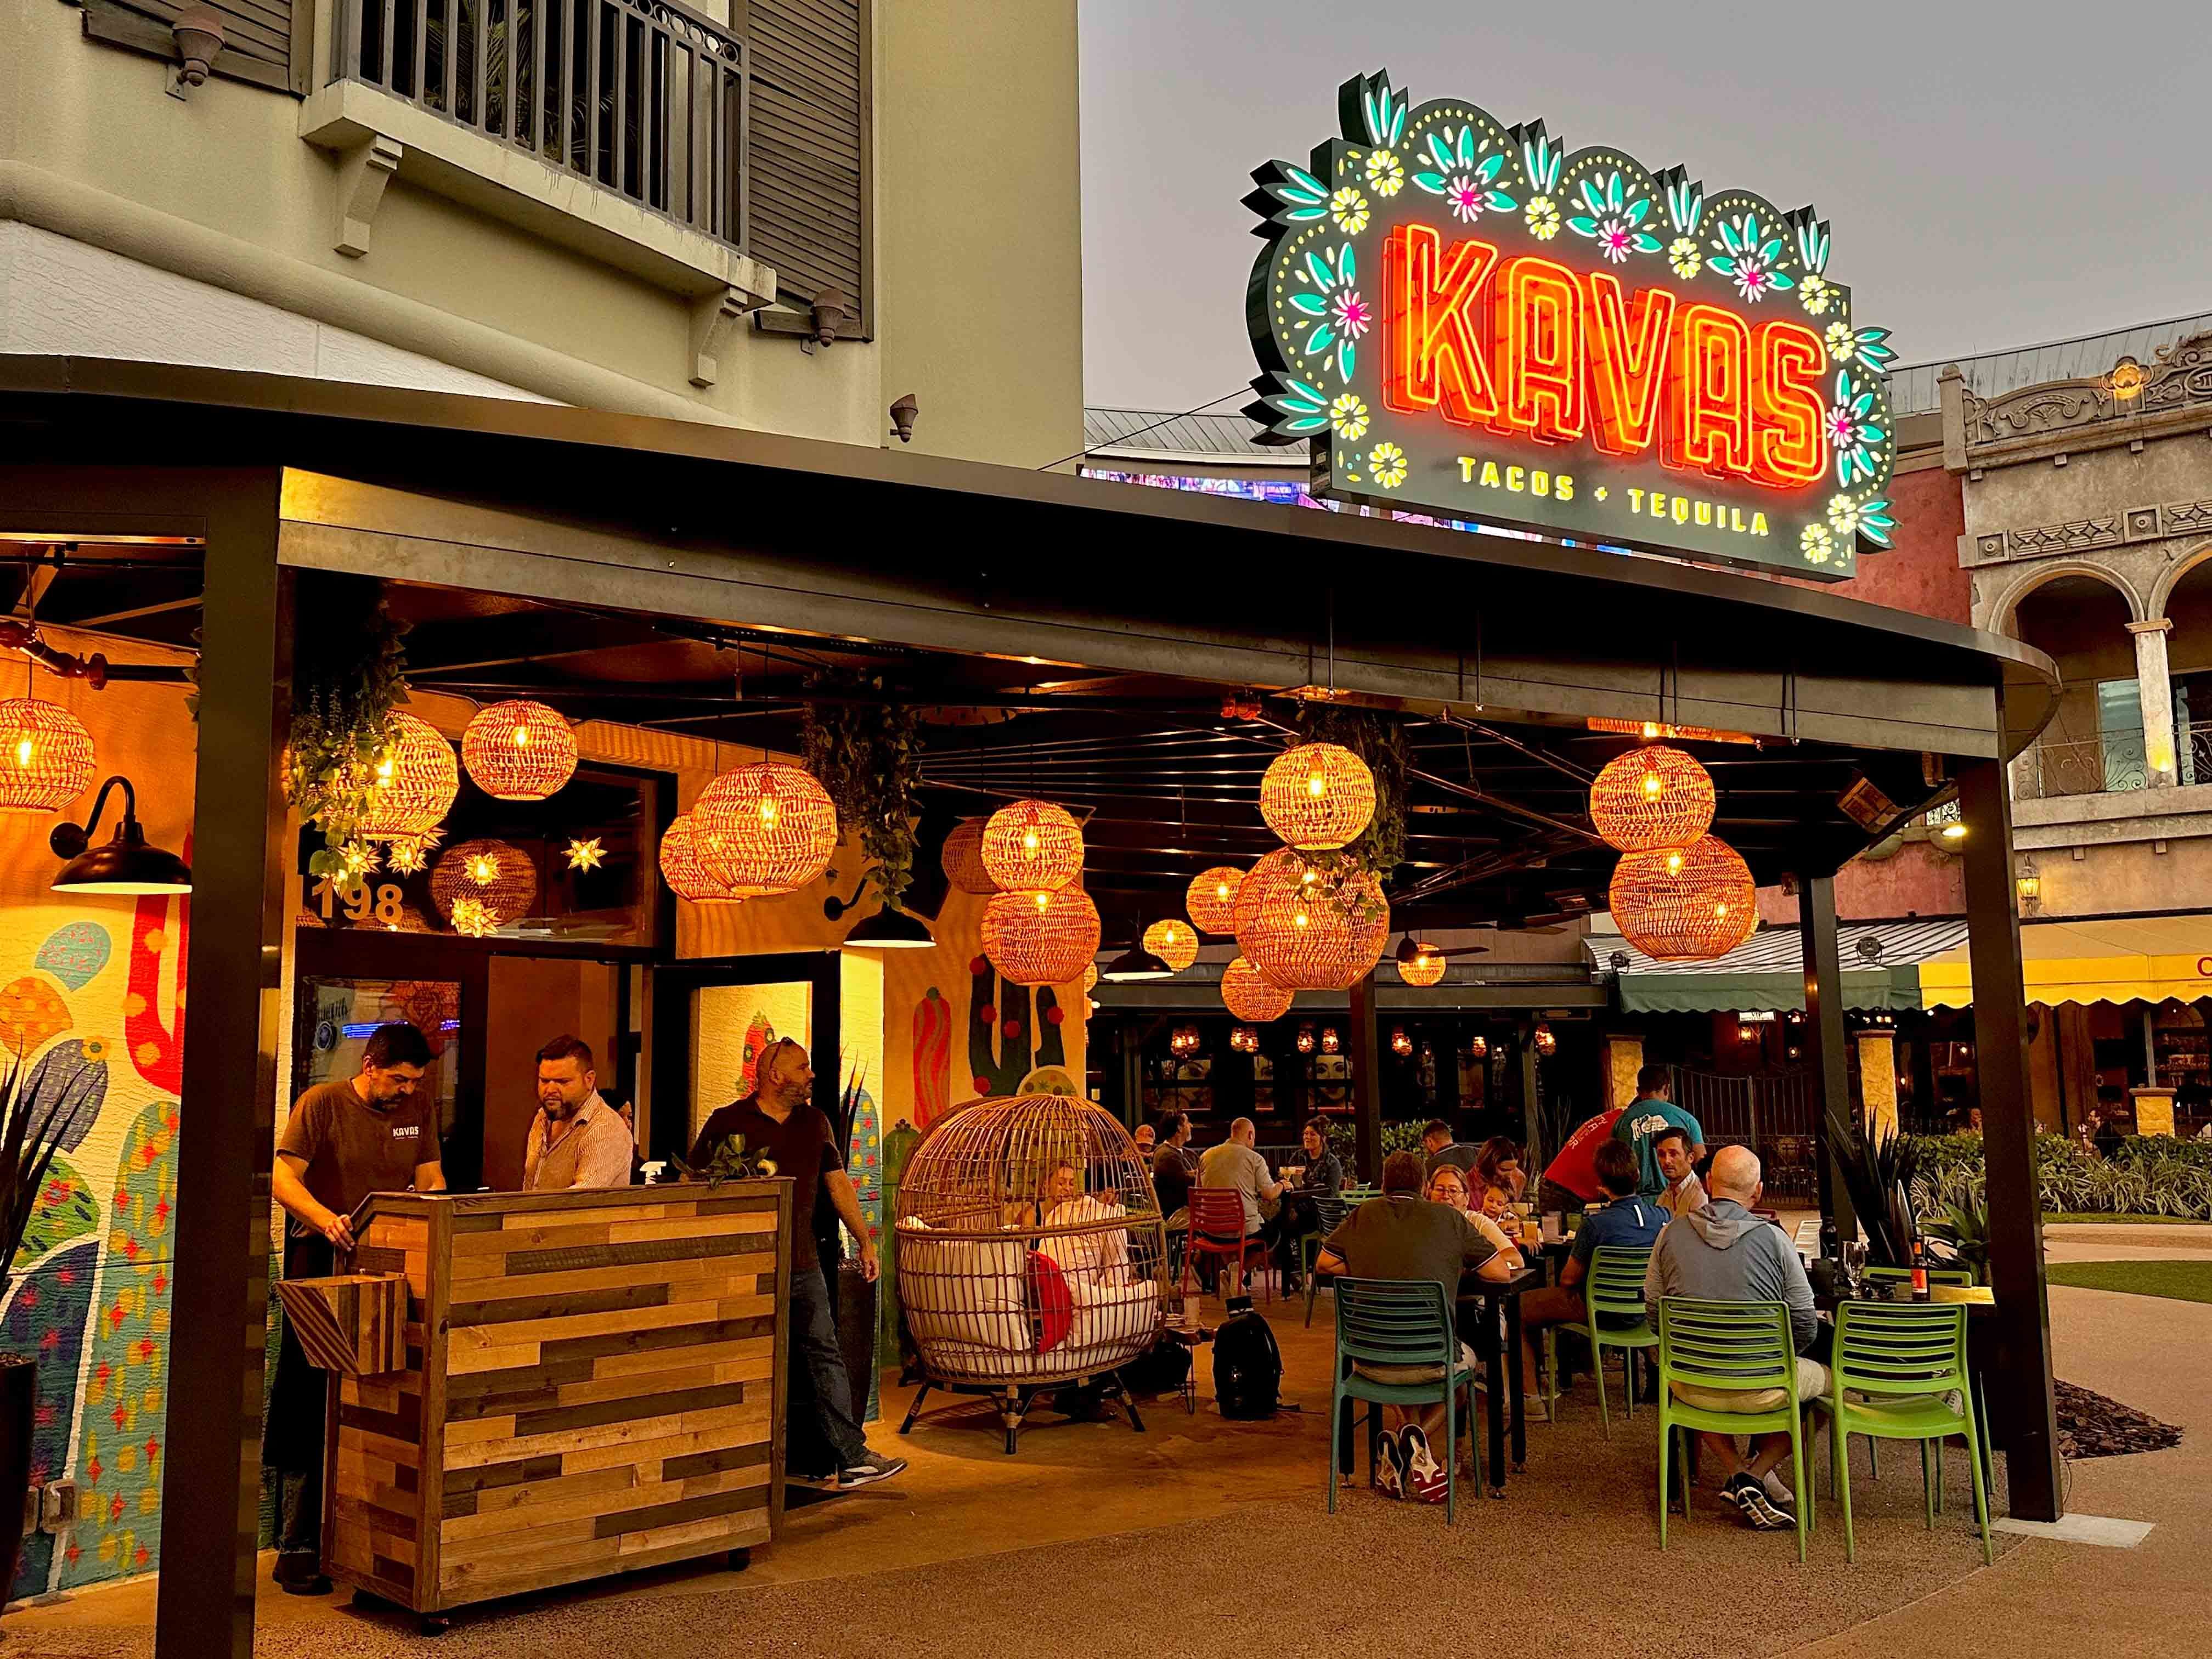 outside seating with kavas sign and hanging lights over tables and chairs